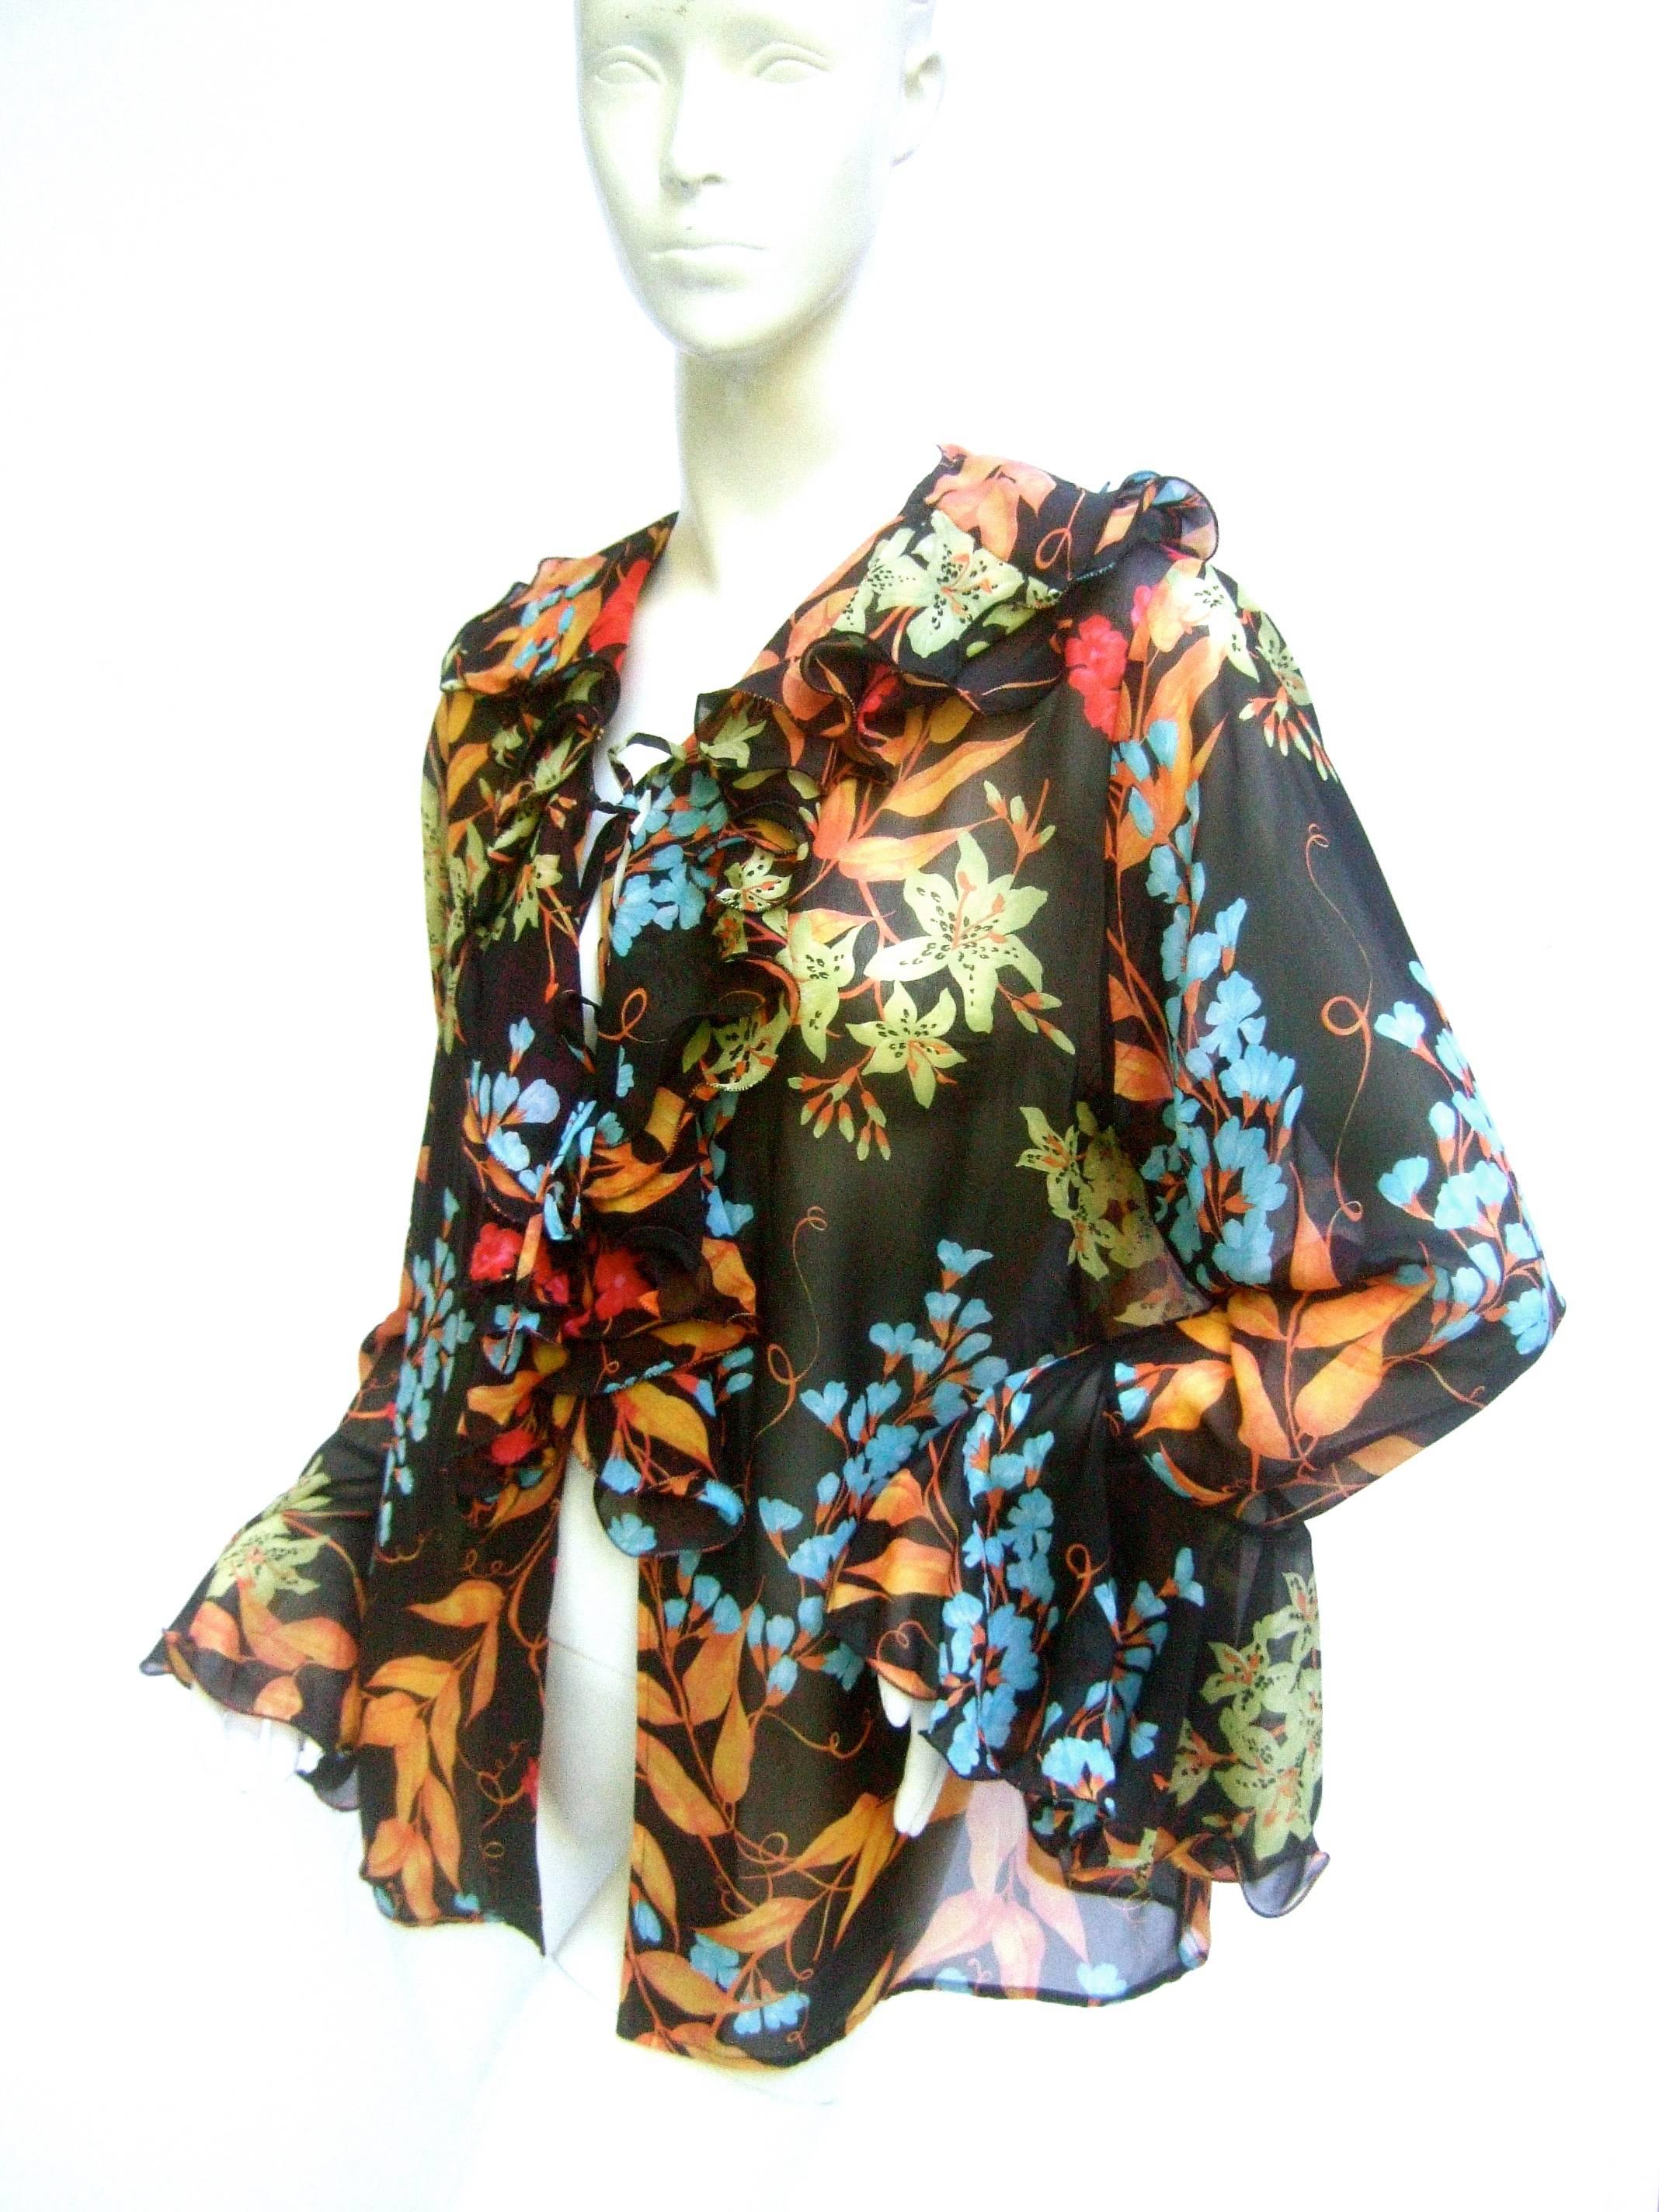 Averardo Bessi Italy Silk floral ruffled blouse 
The sheer black romantic blouse is a garden
of vibrant flower blooms throughout

The loose floaty silk blouse is designed 
with a cascading ruffled collar and billowy
tiered voluminous